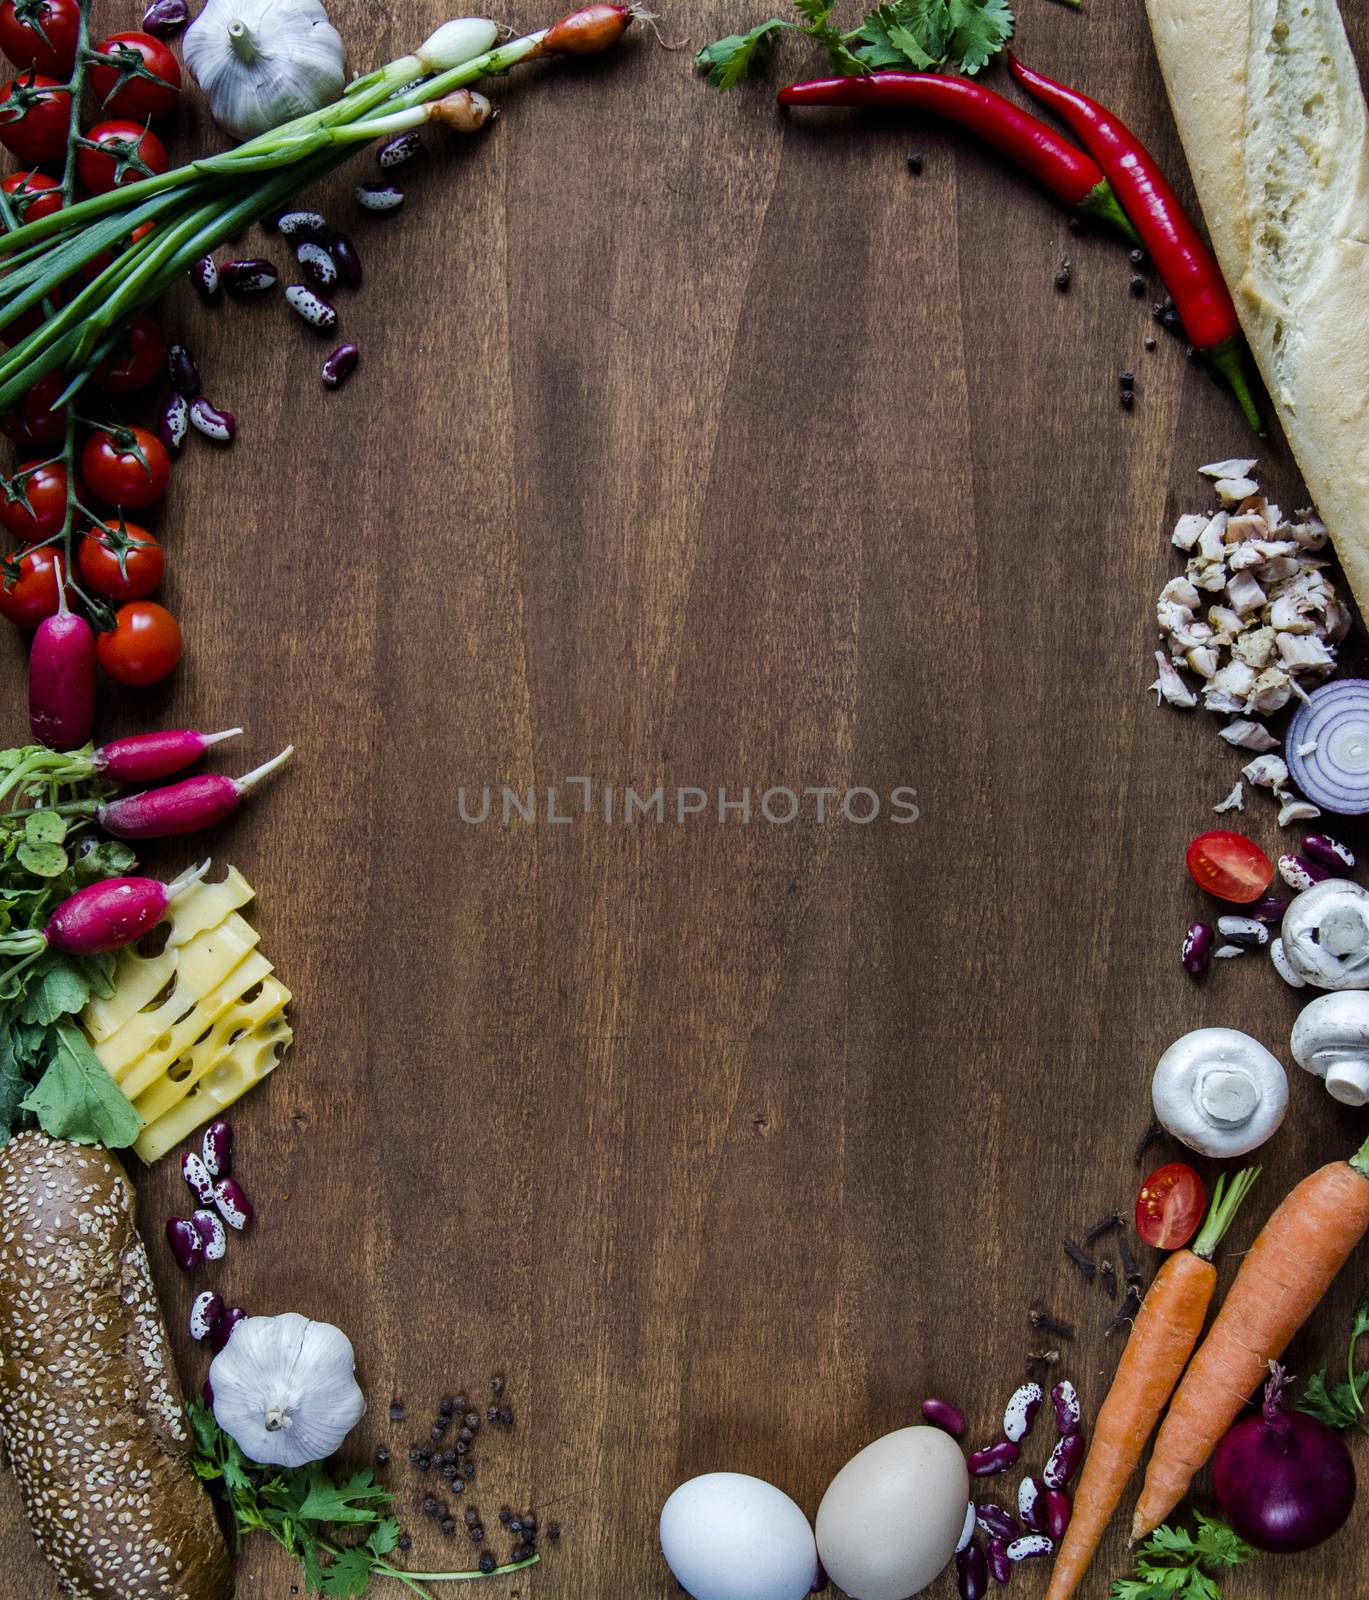 Vegetables, cheese, bread and eggs on wood. Bio Healthy food, herbs and spices. Organic vegetables on wood. Mock up with vegetables